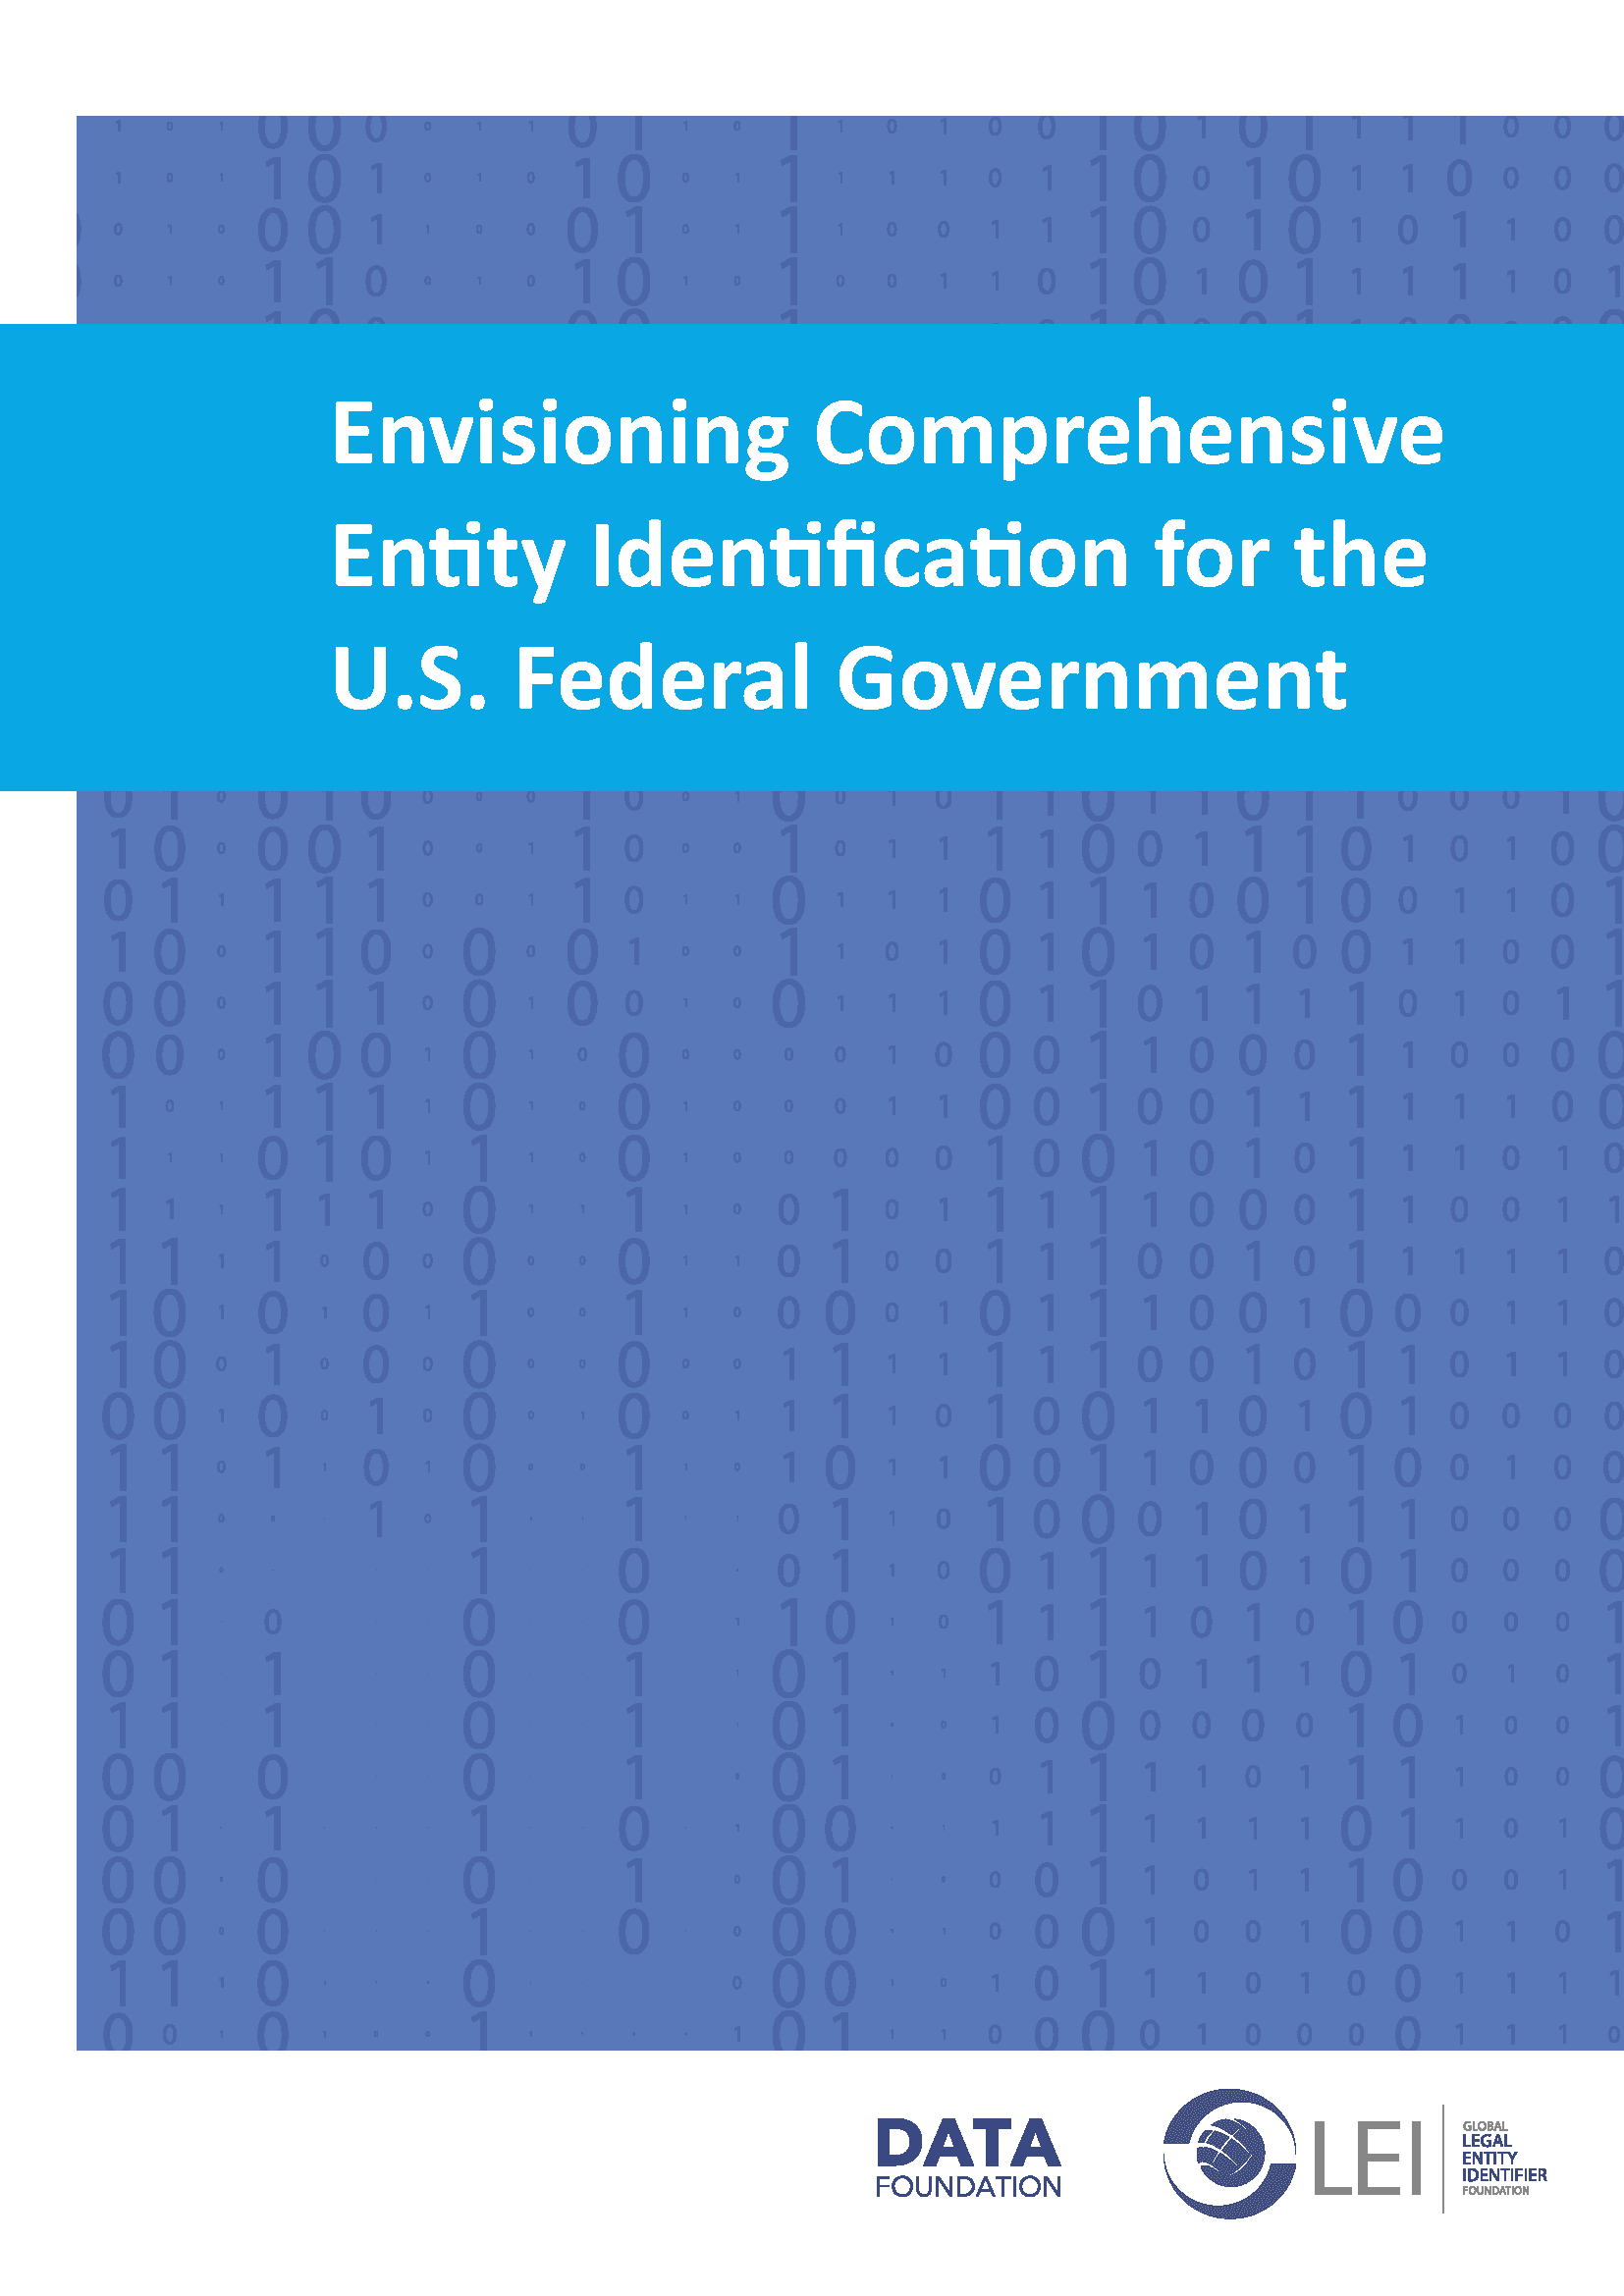 Envisioning Comprehensive Entity Identification for the U.S. Federal Government page 1